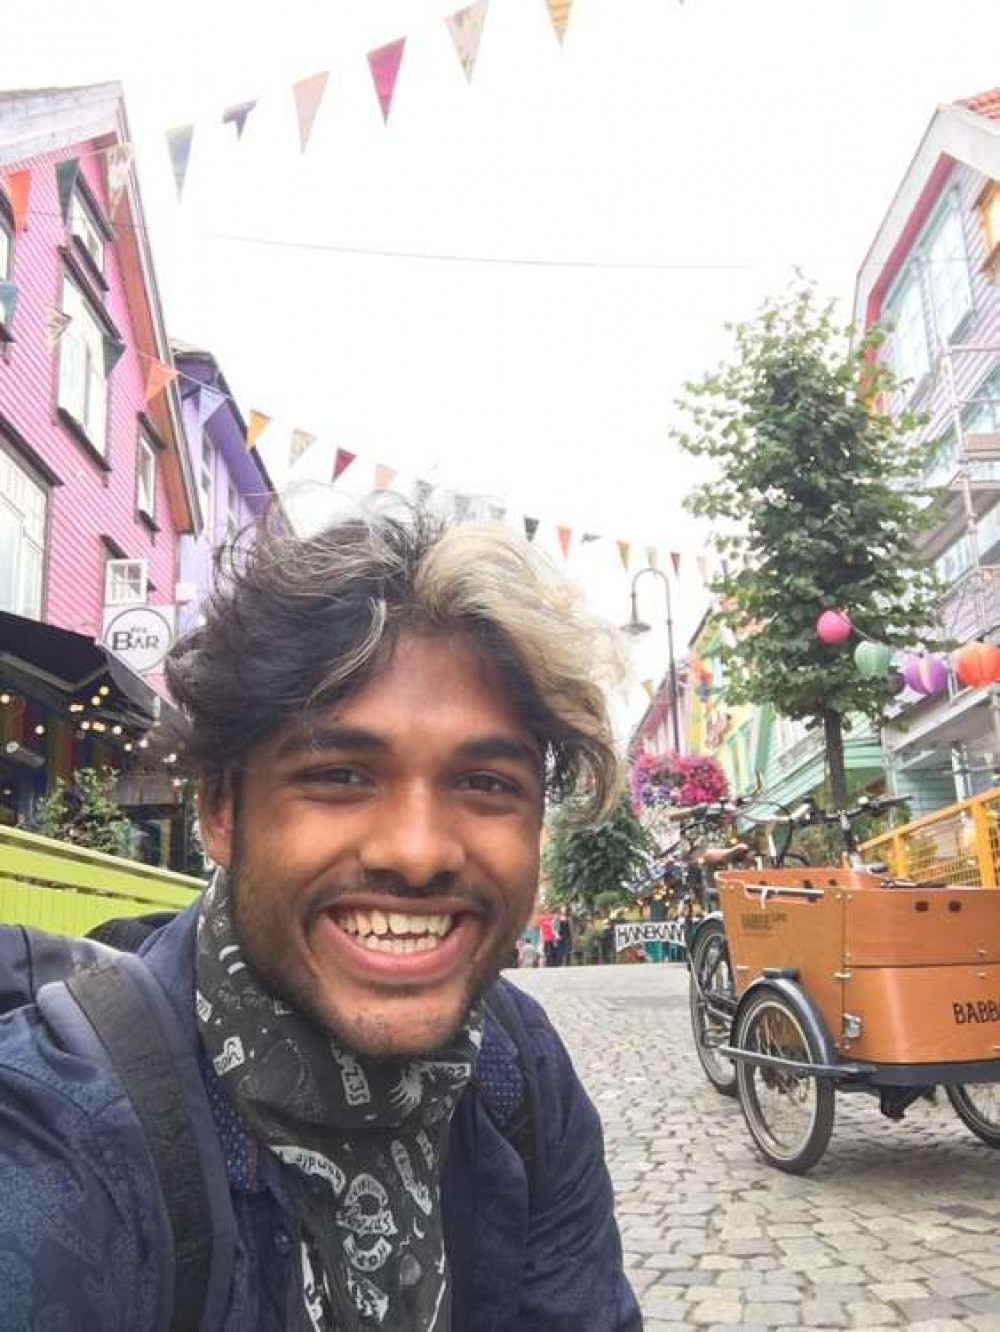 Letchworth's talented and humble Bhuvanesh Ramnauth is off to Oxford University after support from his foster carers, Hitchin Boys School and Herts Virtual Leaning.